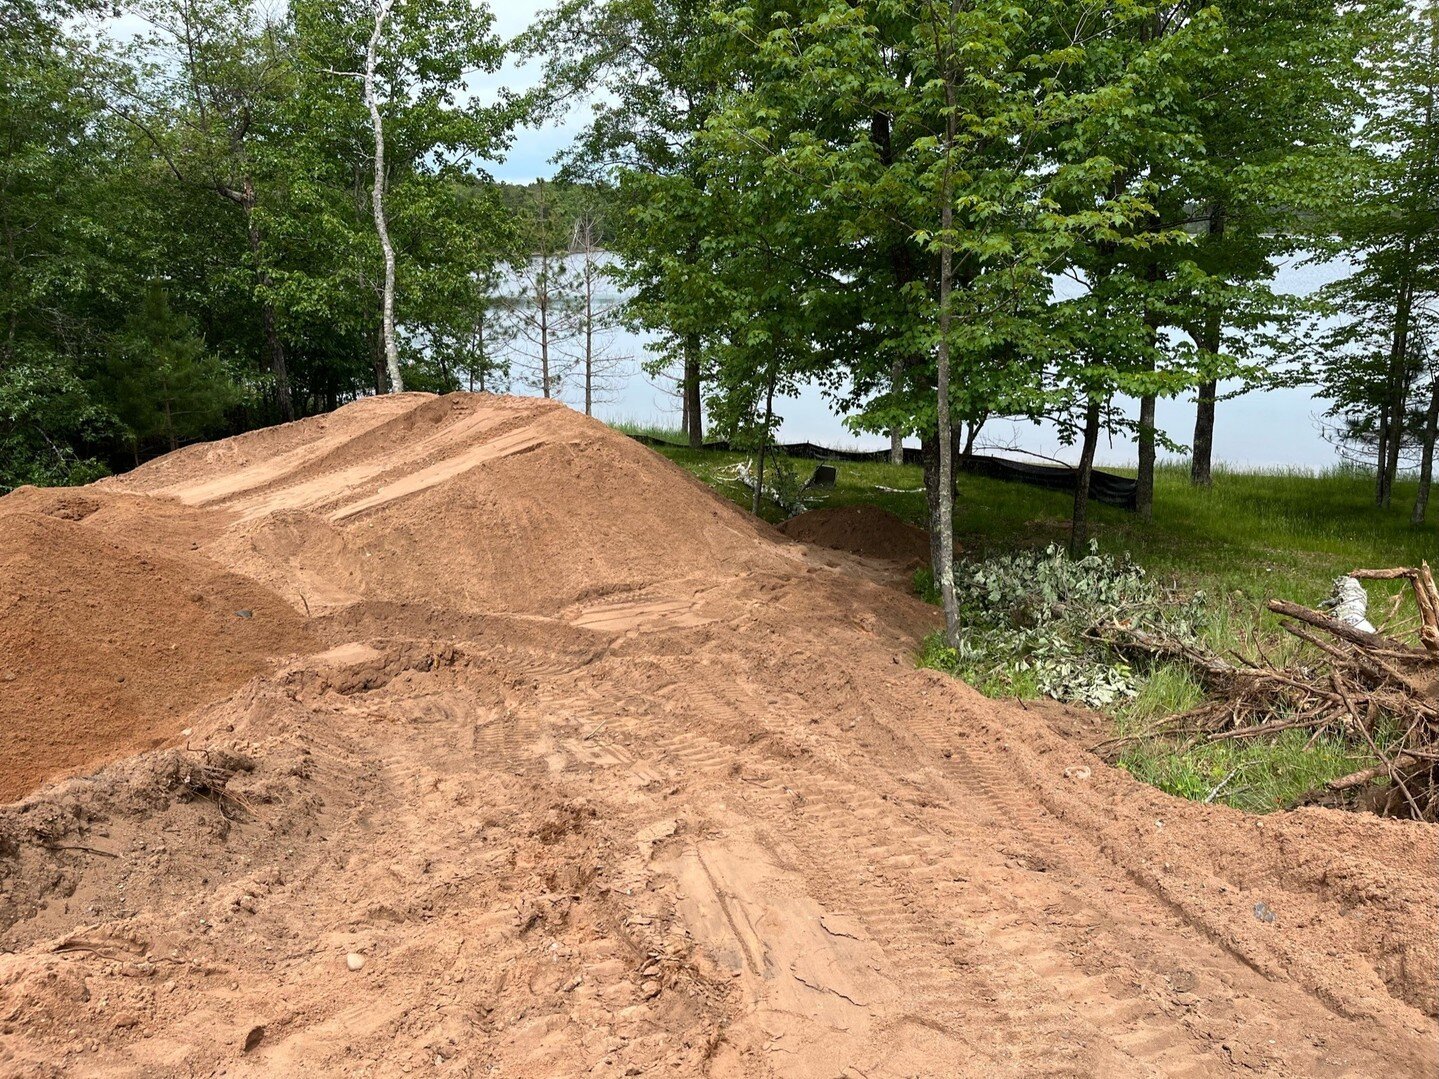 We&rsquo;ve broke ground baby!! Exciting things to come in Wisconsin&hellip; 🤩 @kevinstolper @lalareimagined
.
.
.
.
.
.
#comingsoon #wisconsin #cabinliving #cabinetliving #summer #vacation #lake #nature #outdoors #outdoorsy #mountains #outdoorsman 